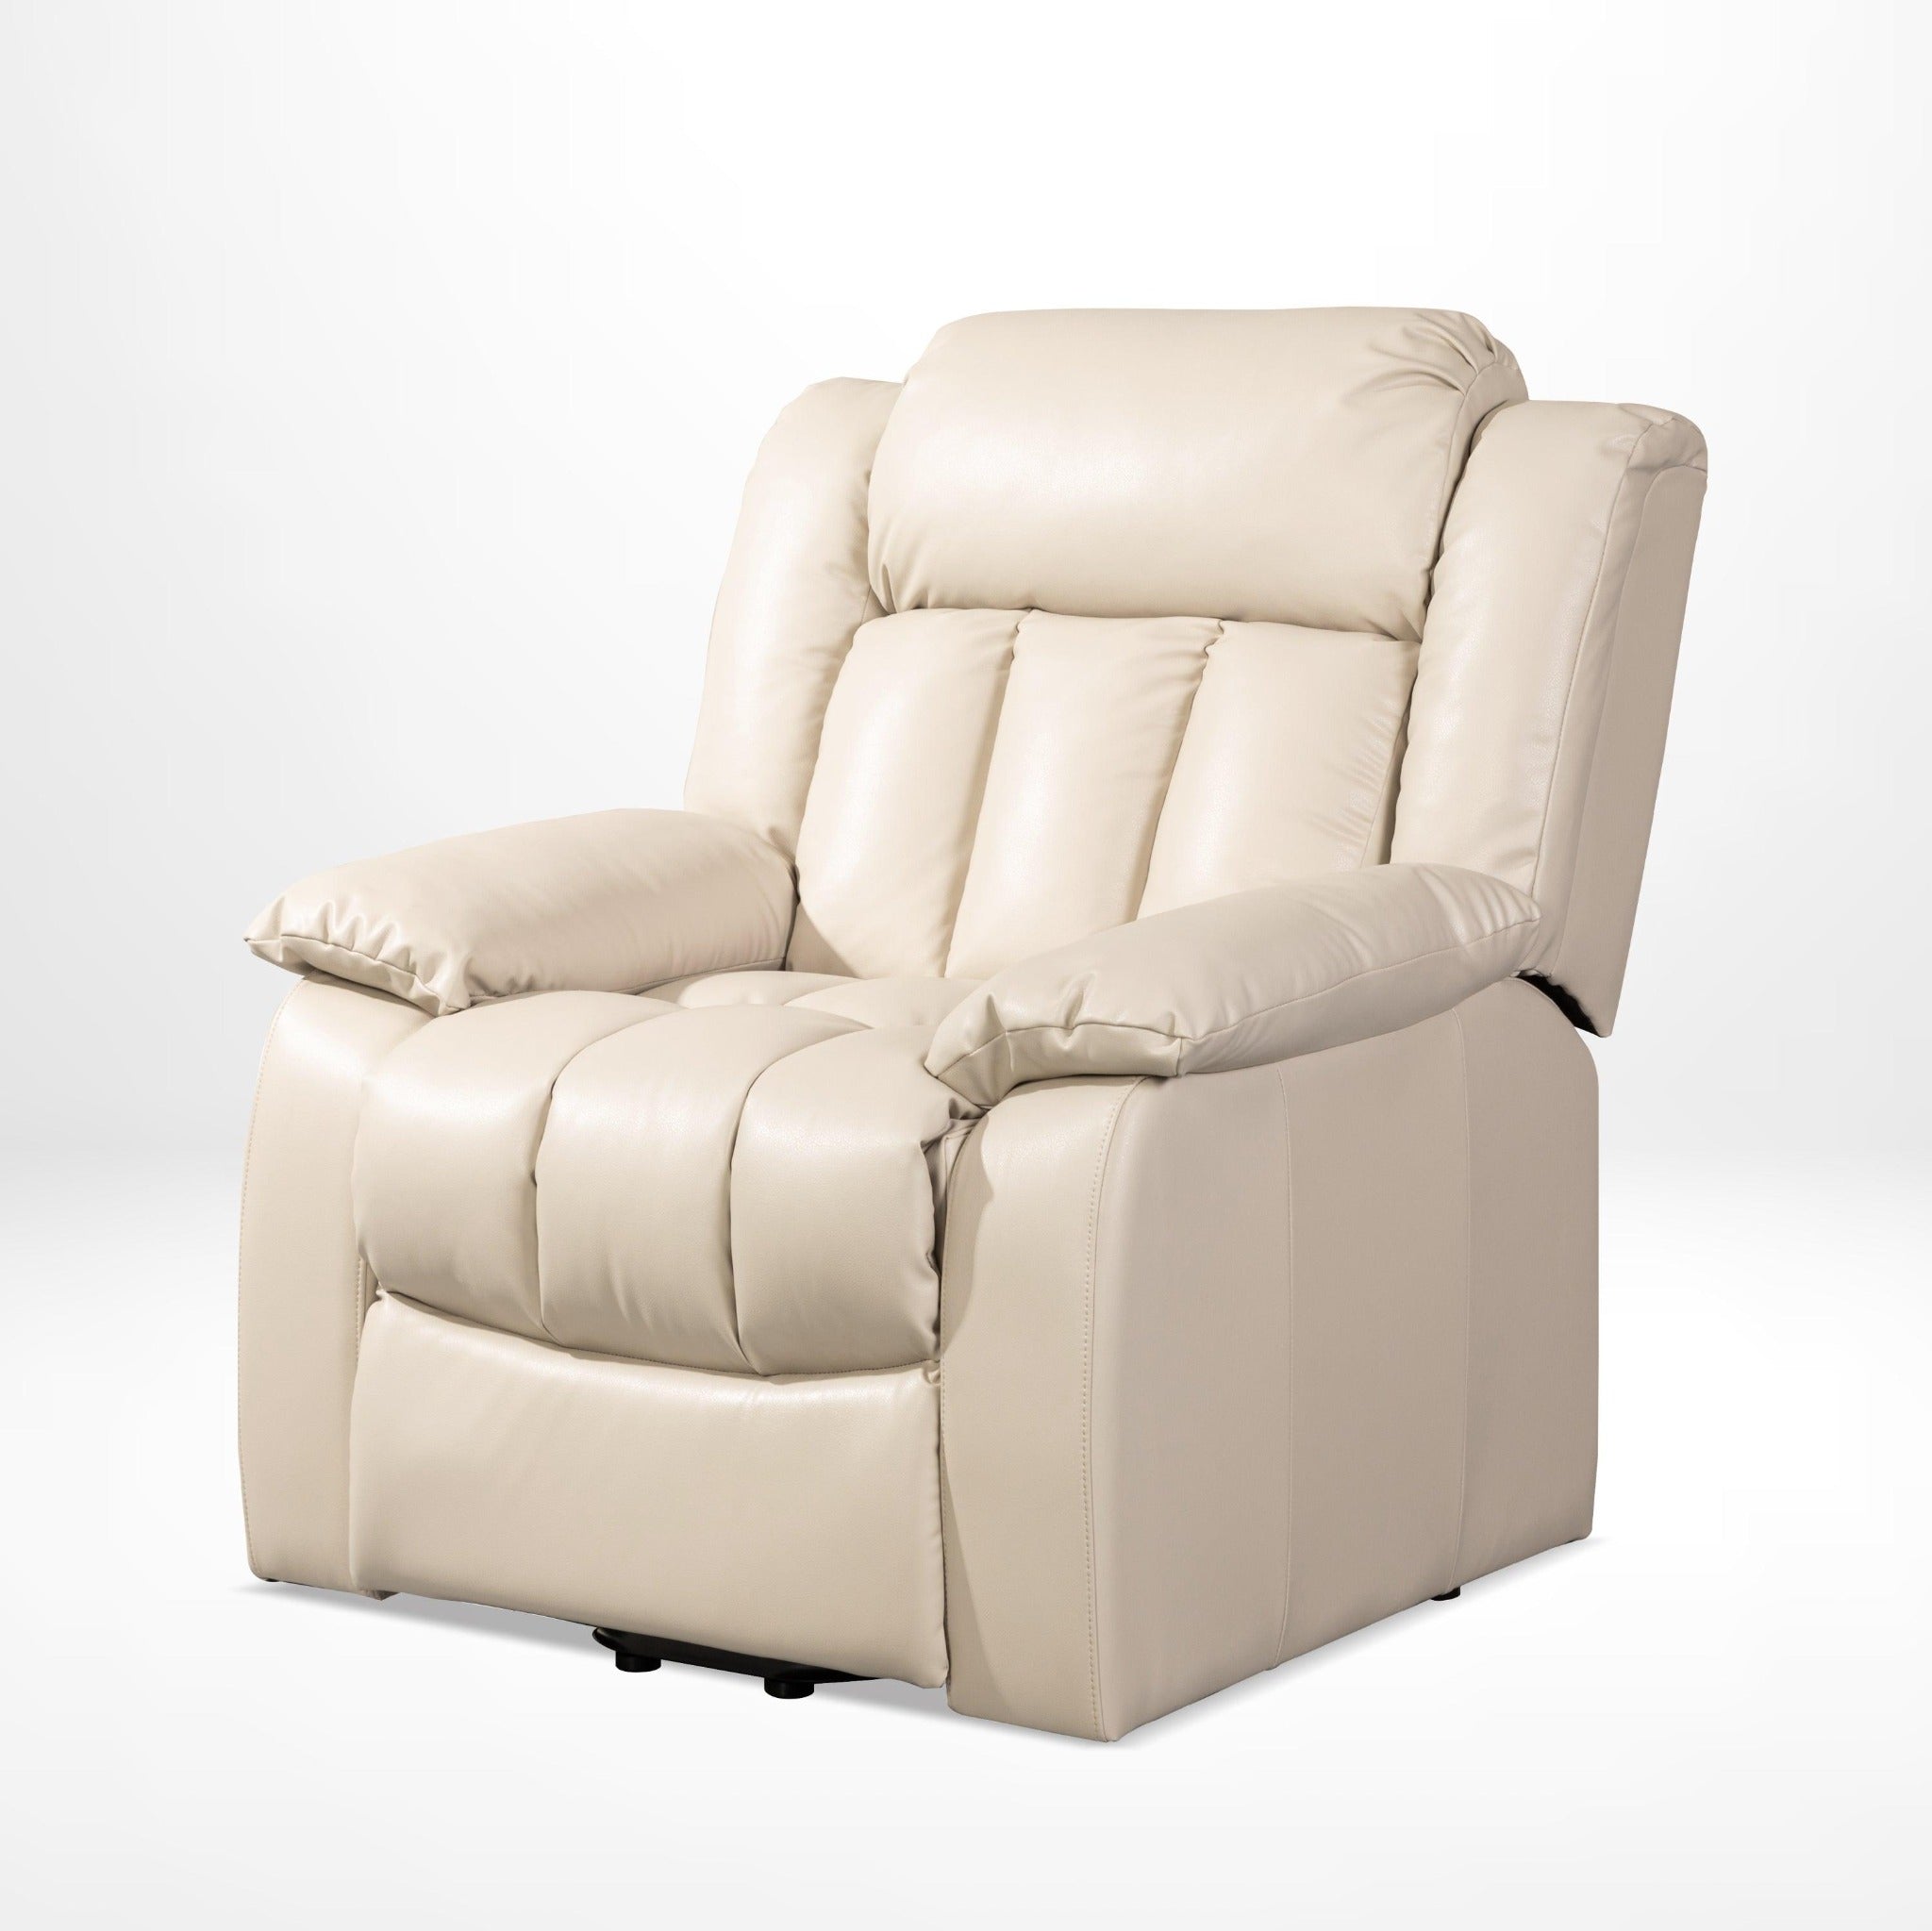 Wide Power Lift Chair Recliner, Beige, seated angle view